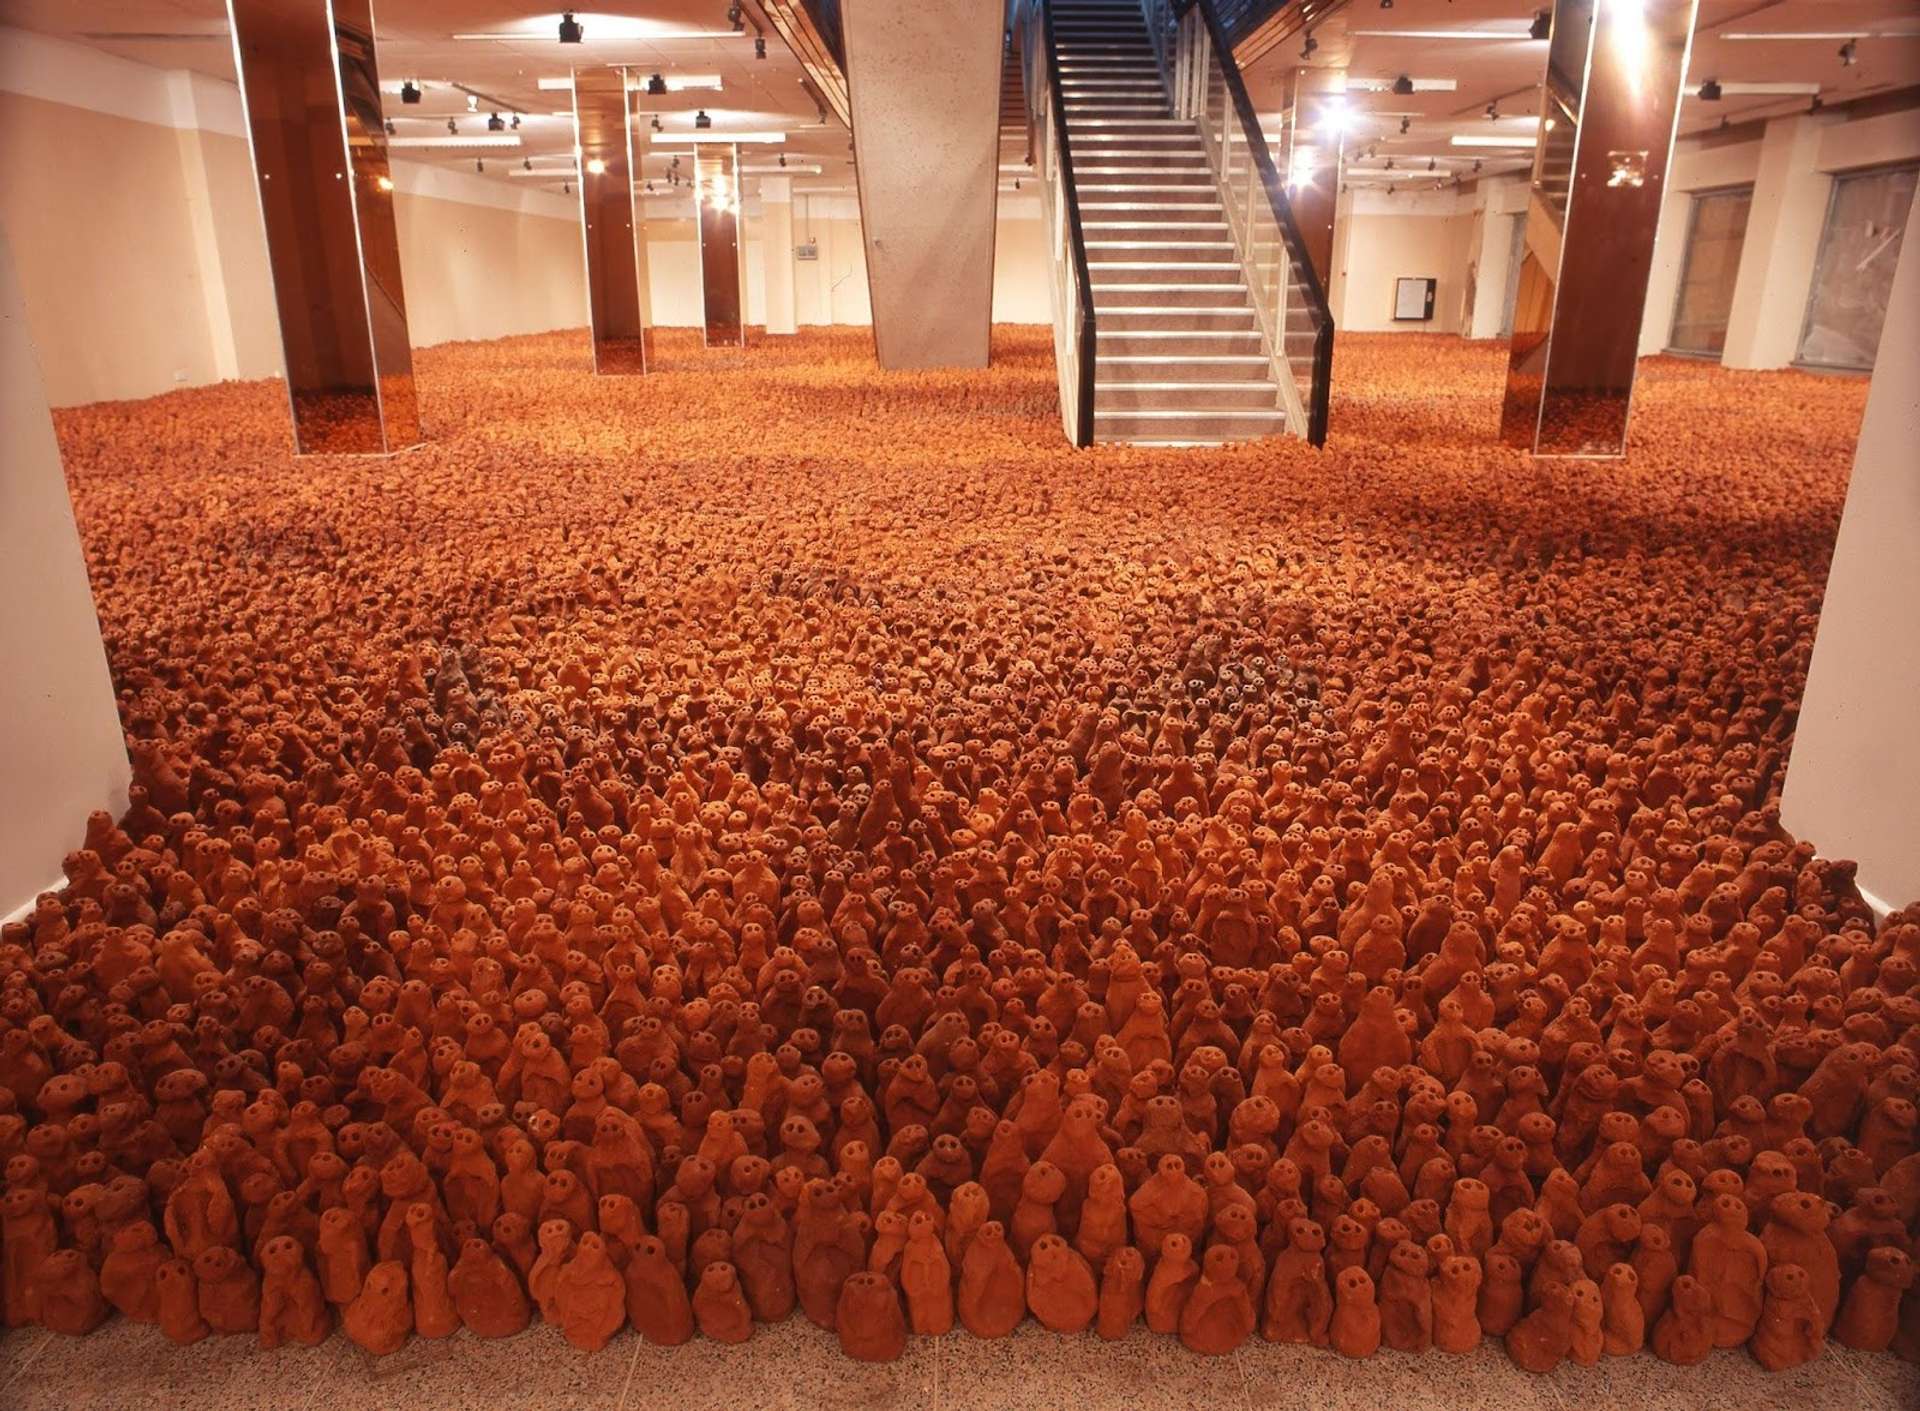 Antony Gormley's installation Fields for the British Isles: A depiction of over 40,000 uniquely shaped terracotta figures arranged in a field.